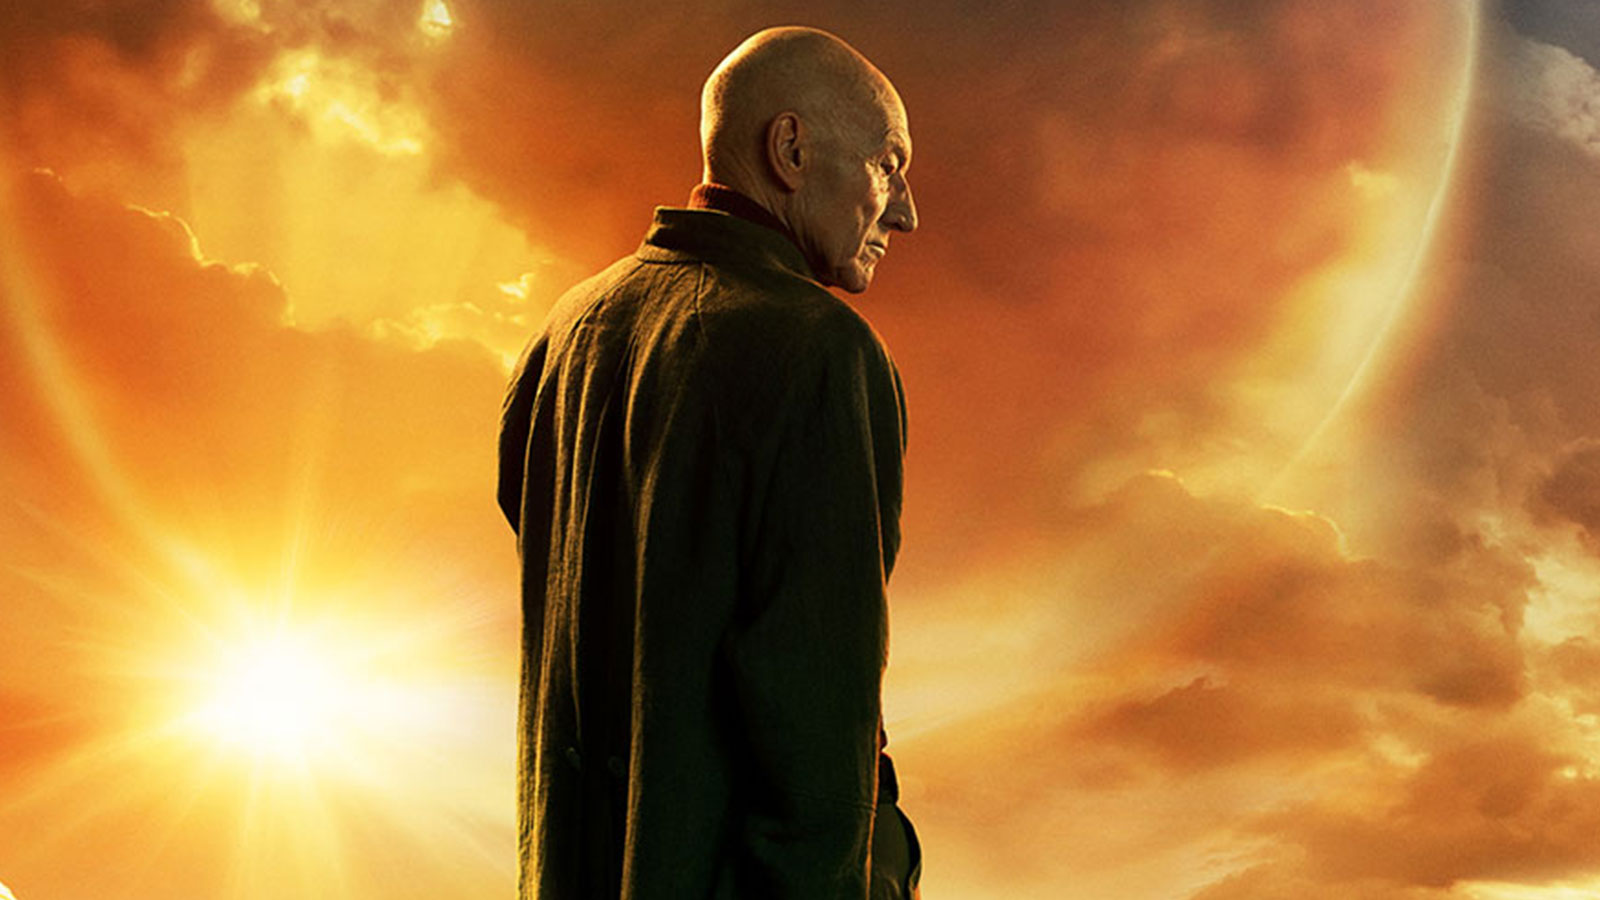 STAR TREK: PICARD Soundtrack Now Available